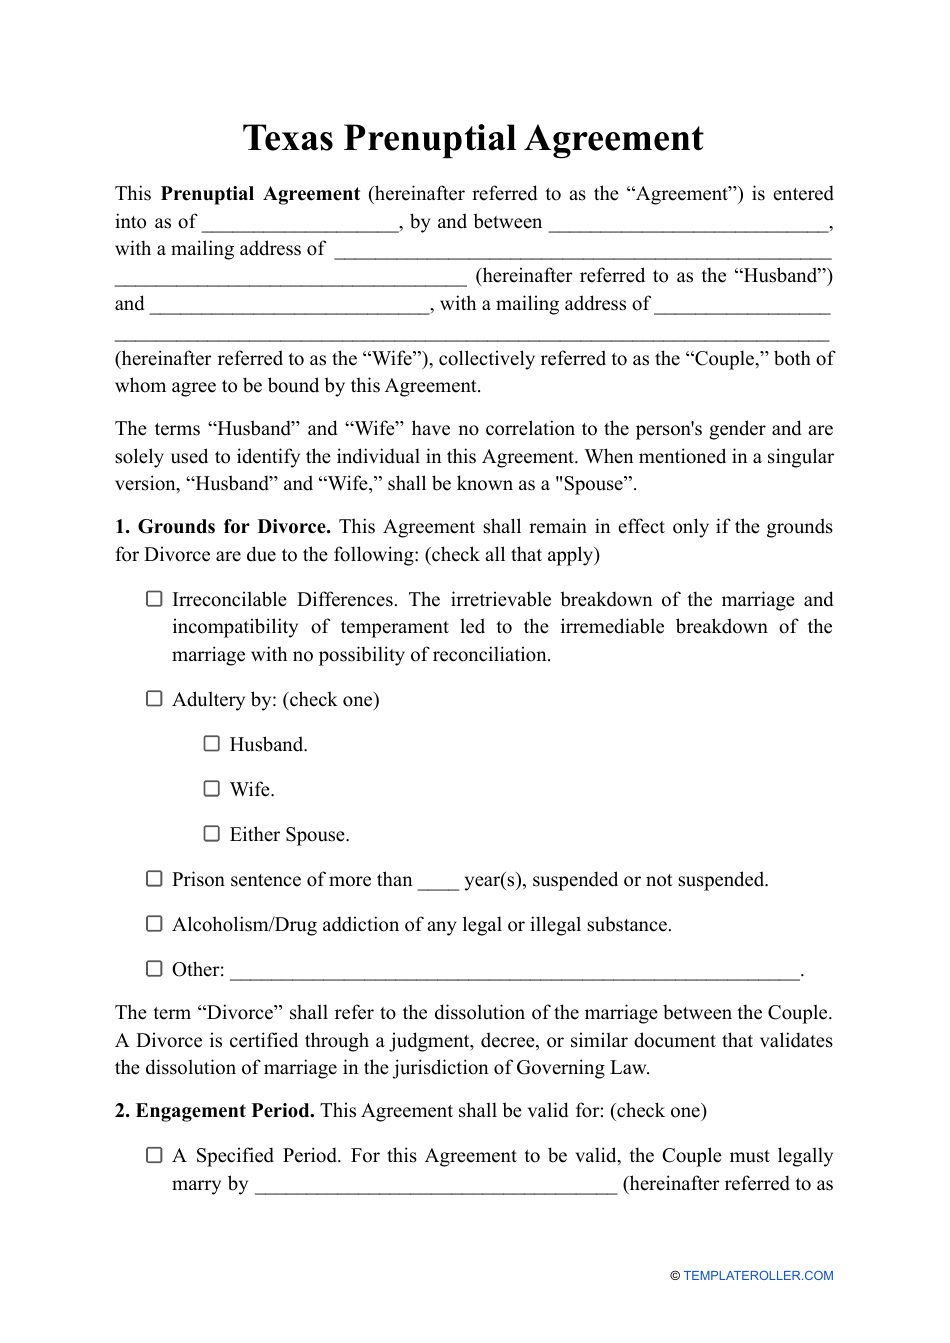 Prenuptial Agreement Template - Texas, Page 1